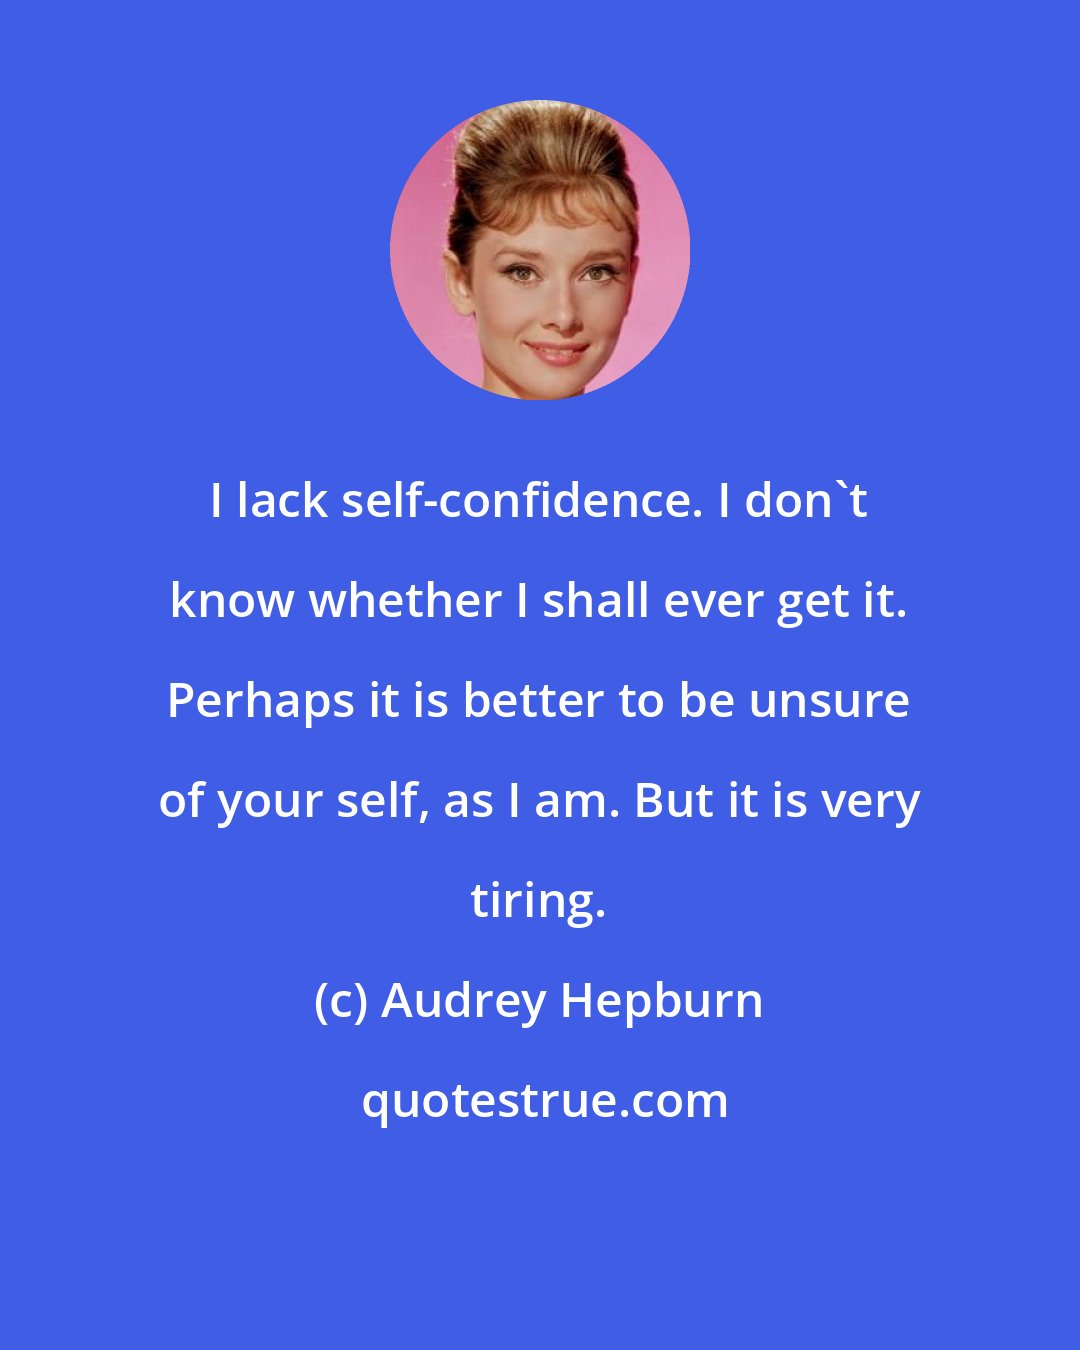 Audrey Hepburn: I lack self-confidence. I don't know whether I shall ever get it. Perhaps it is better to be unsure of your self, as I am. But it is very tiring.